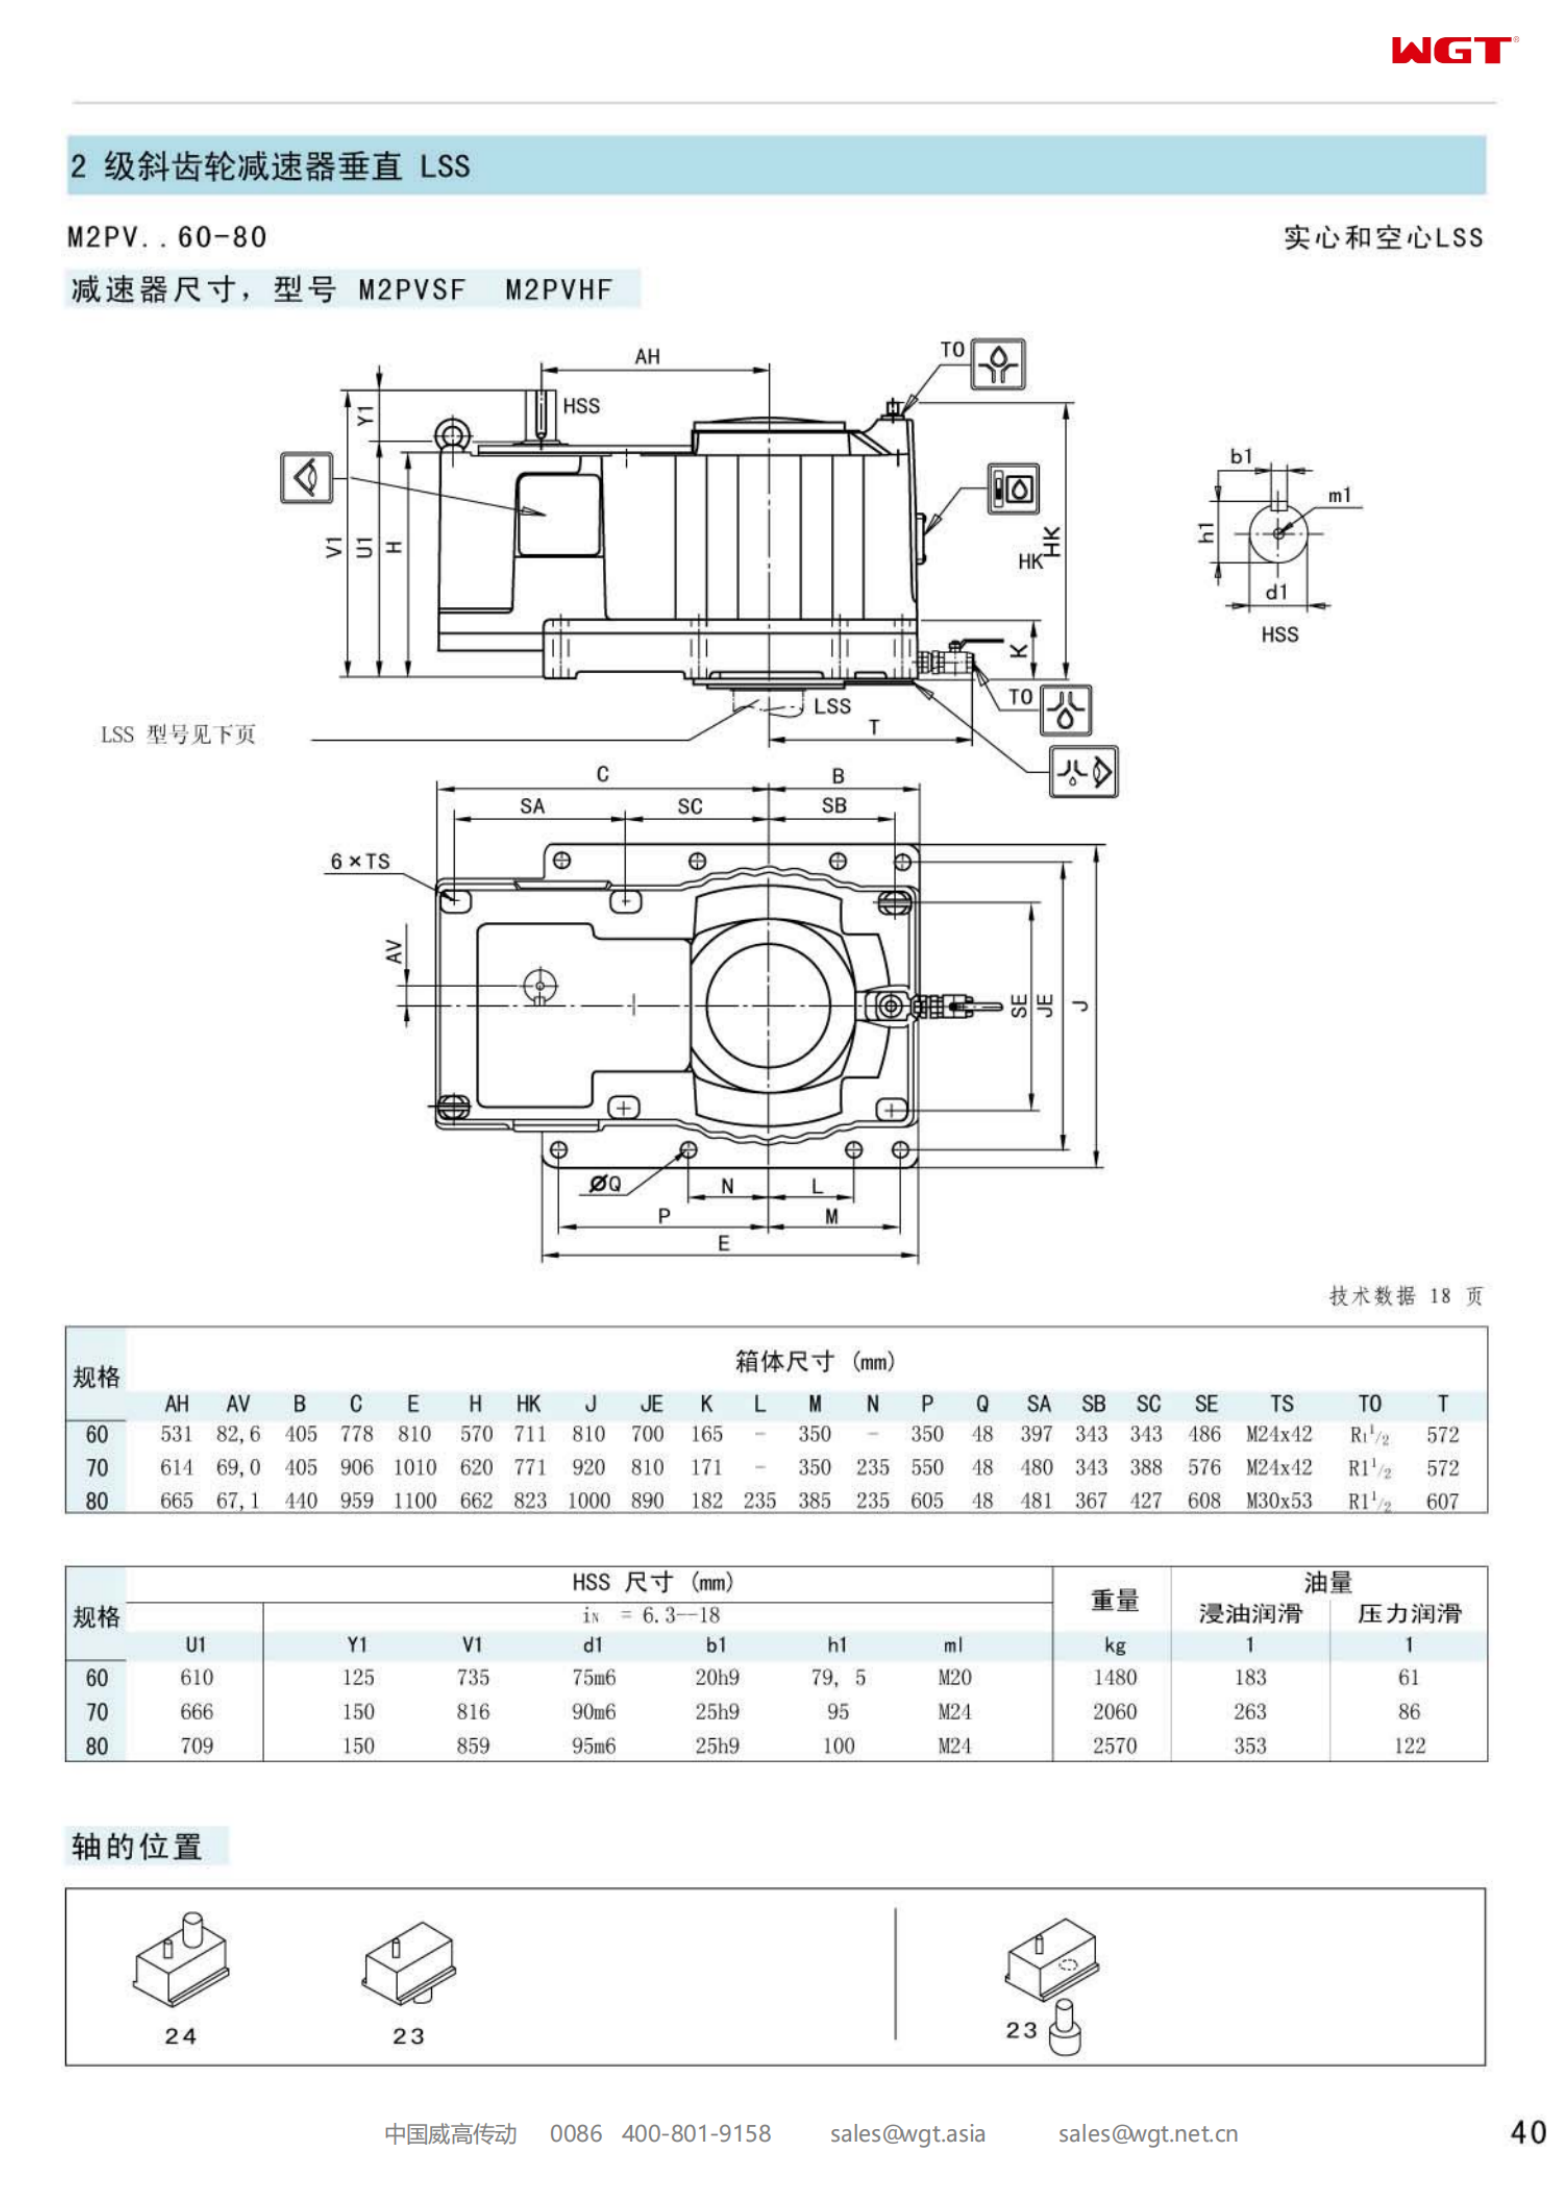 M2PVSF60 Replace_SEW_M_Series Gearbox